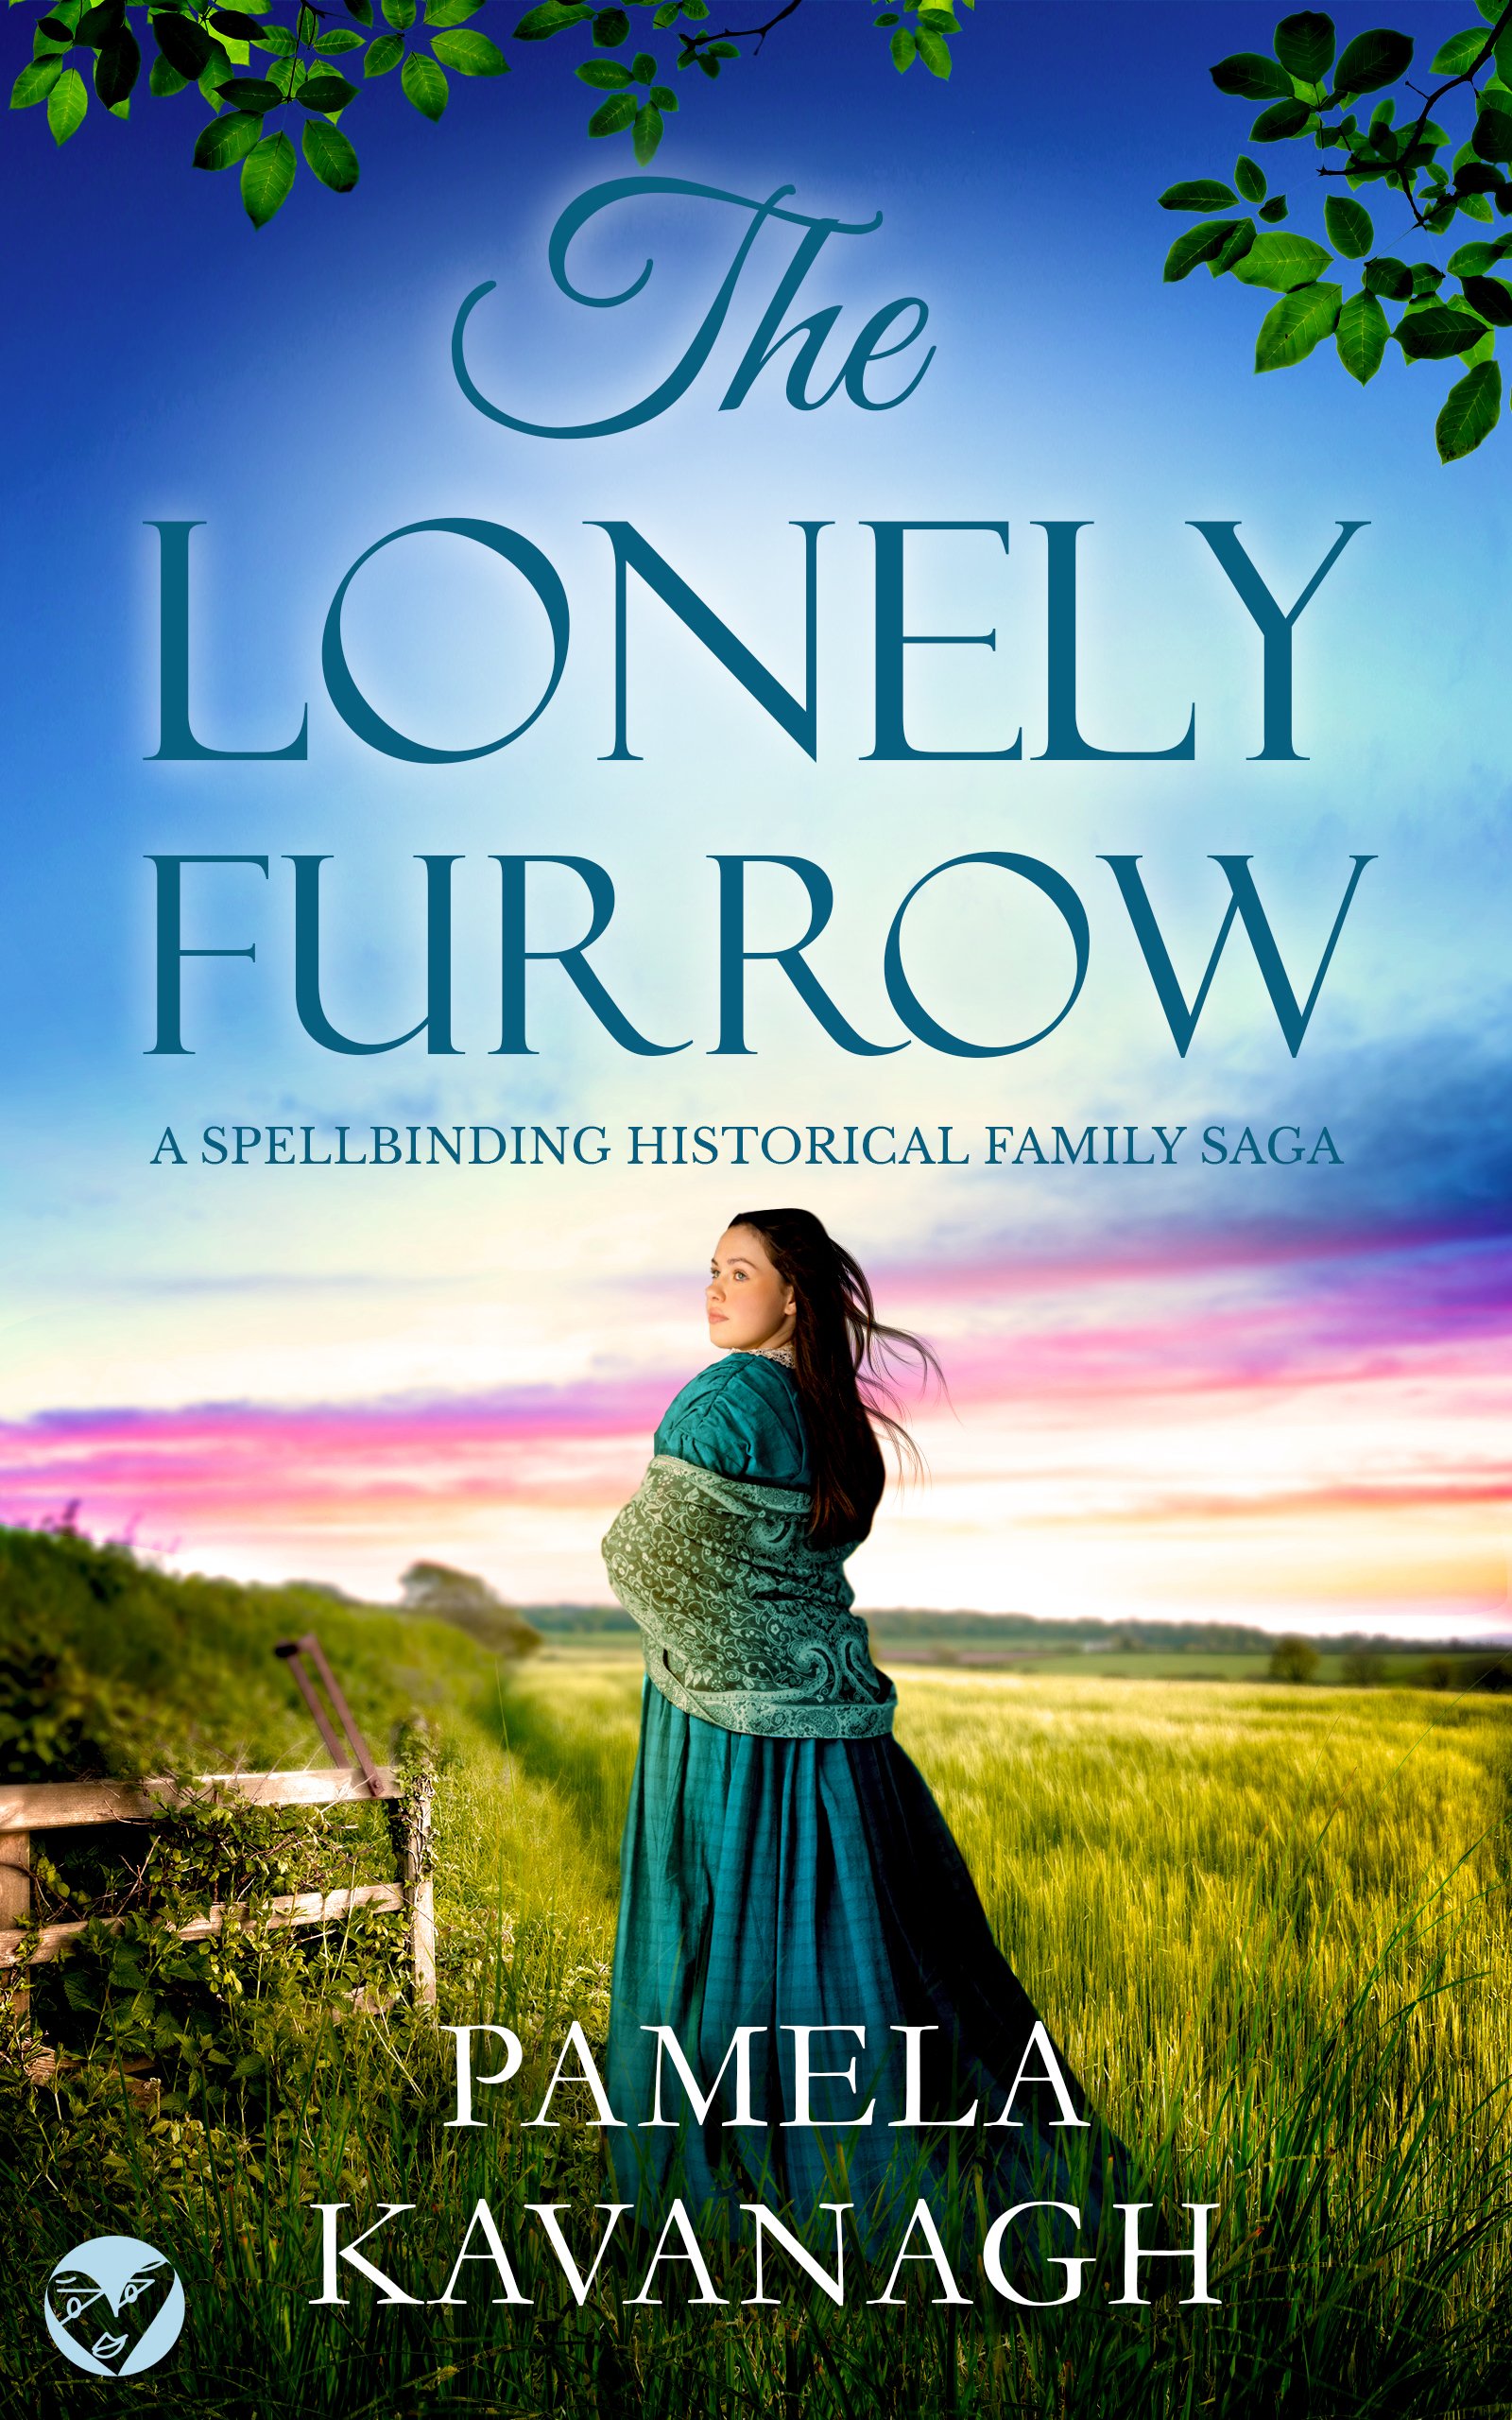 THE LONELY FURROW Cover publish.jpg